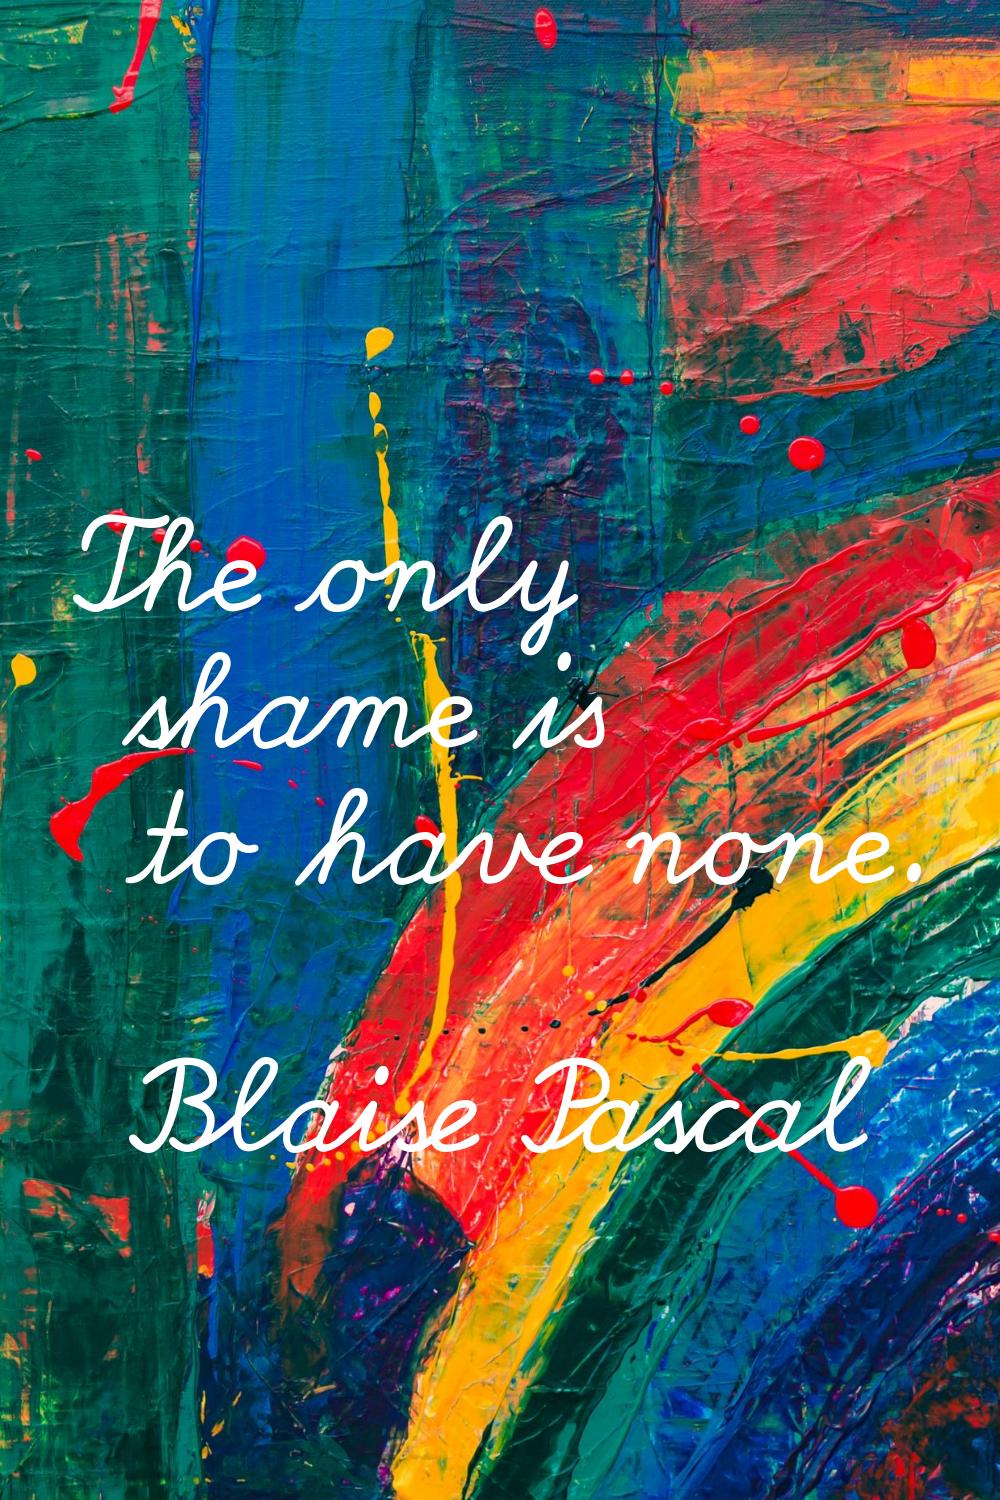 The only shame is to have none.